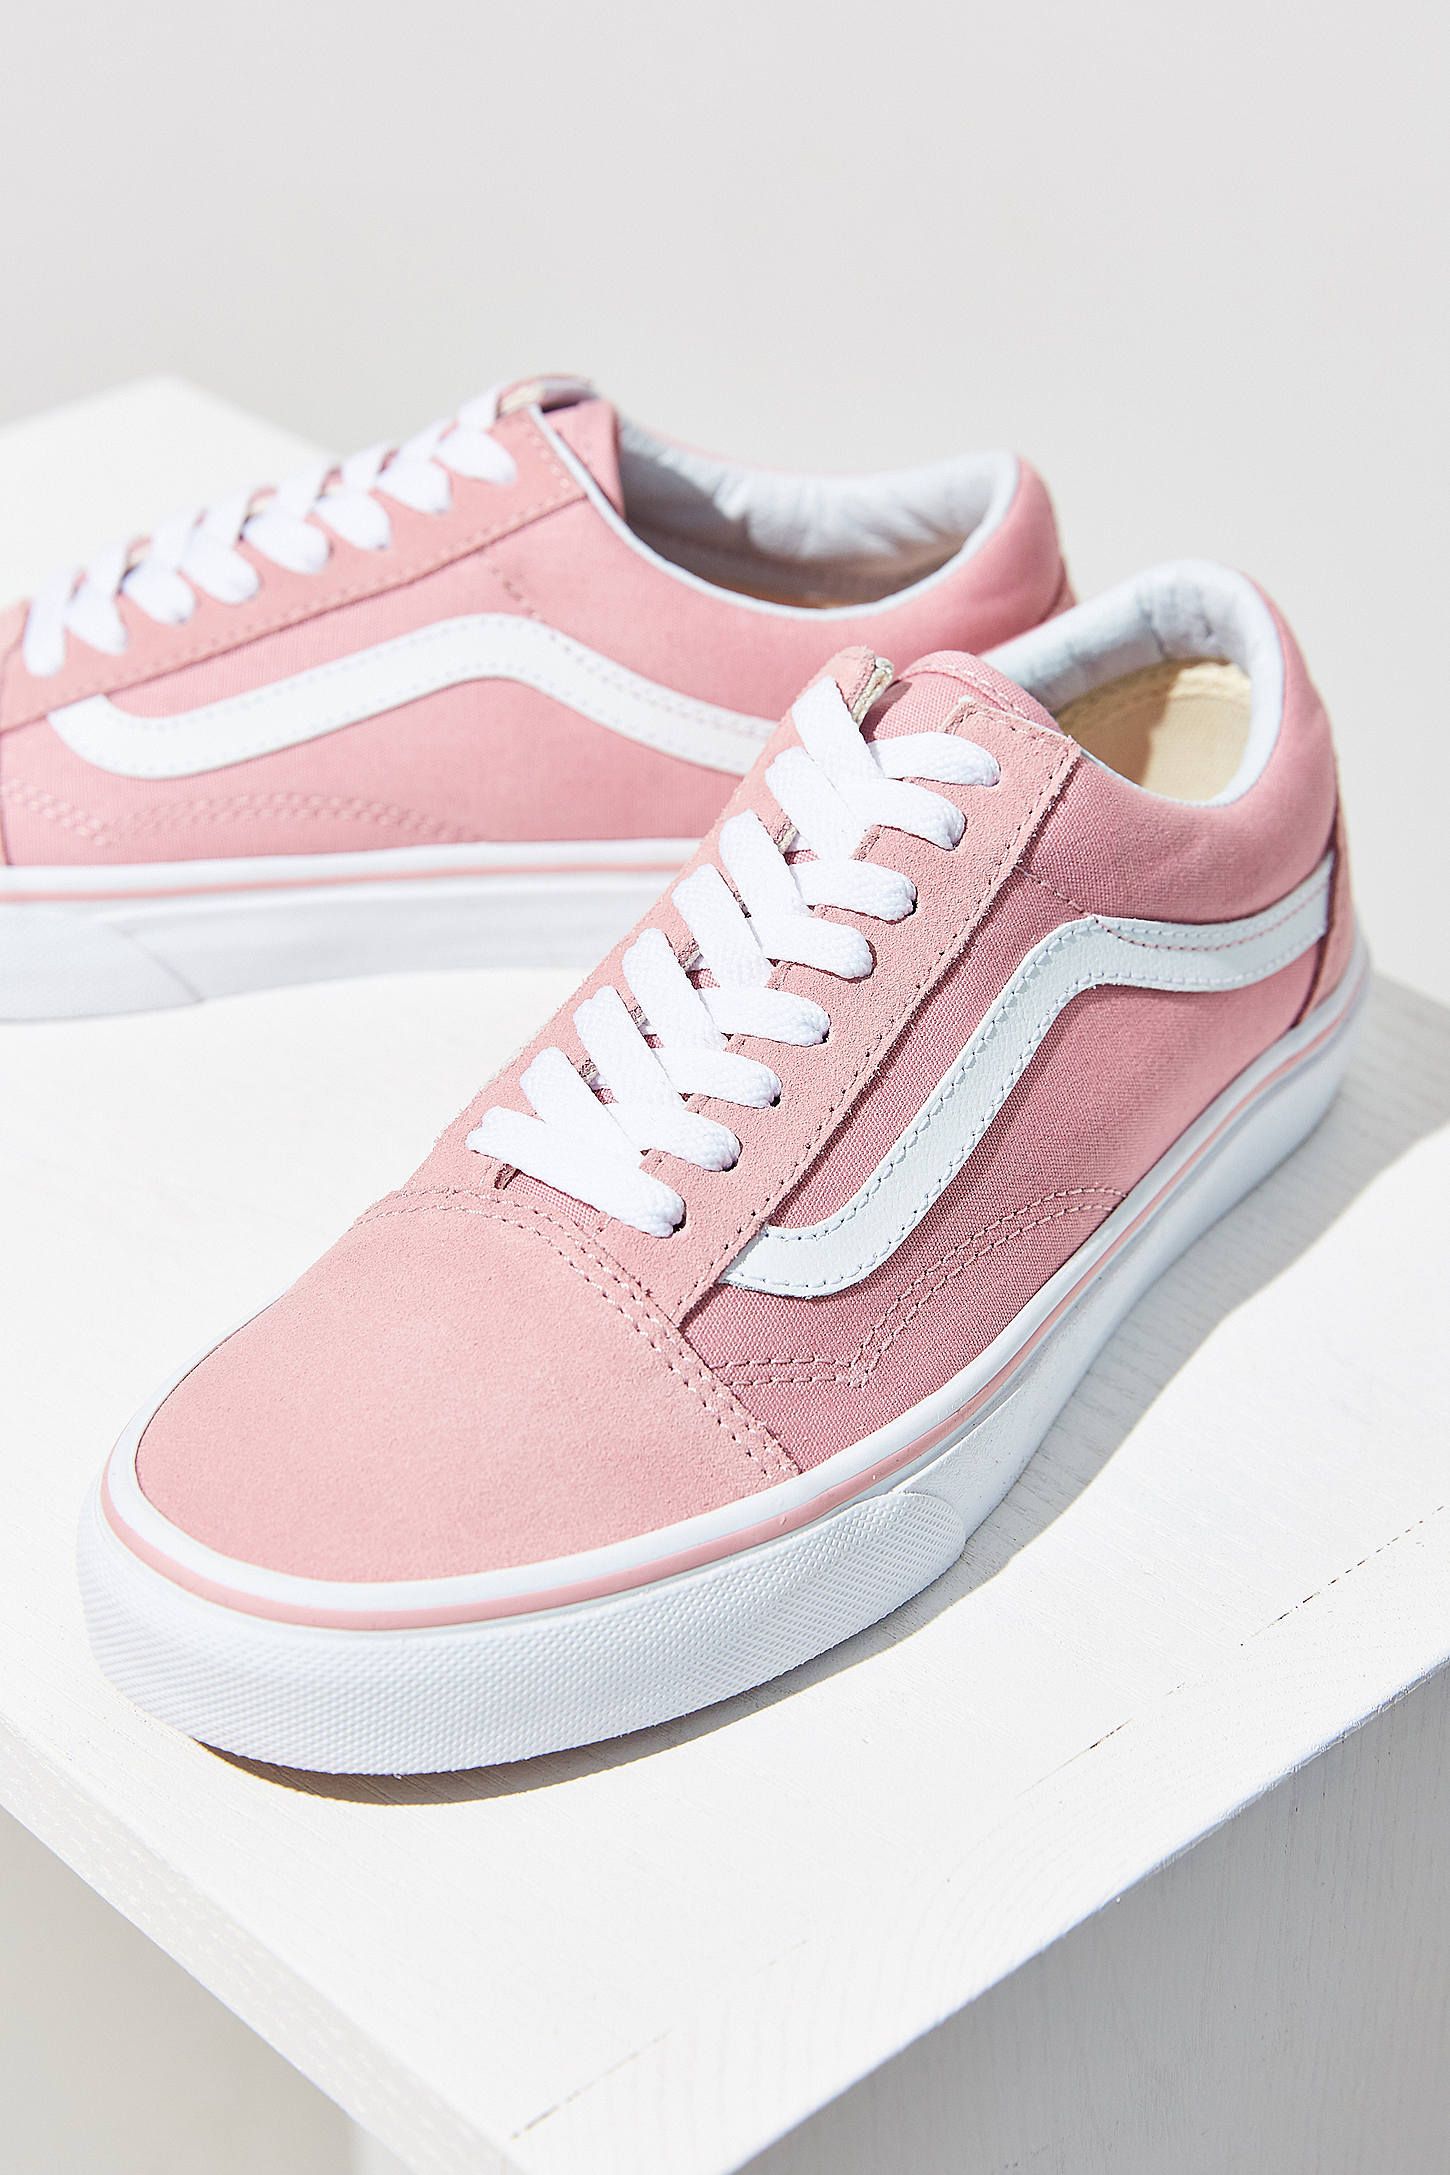 Old pink sneakers photo